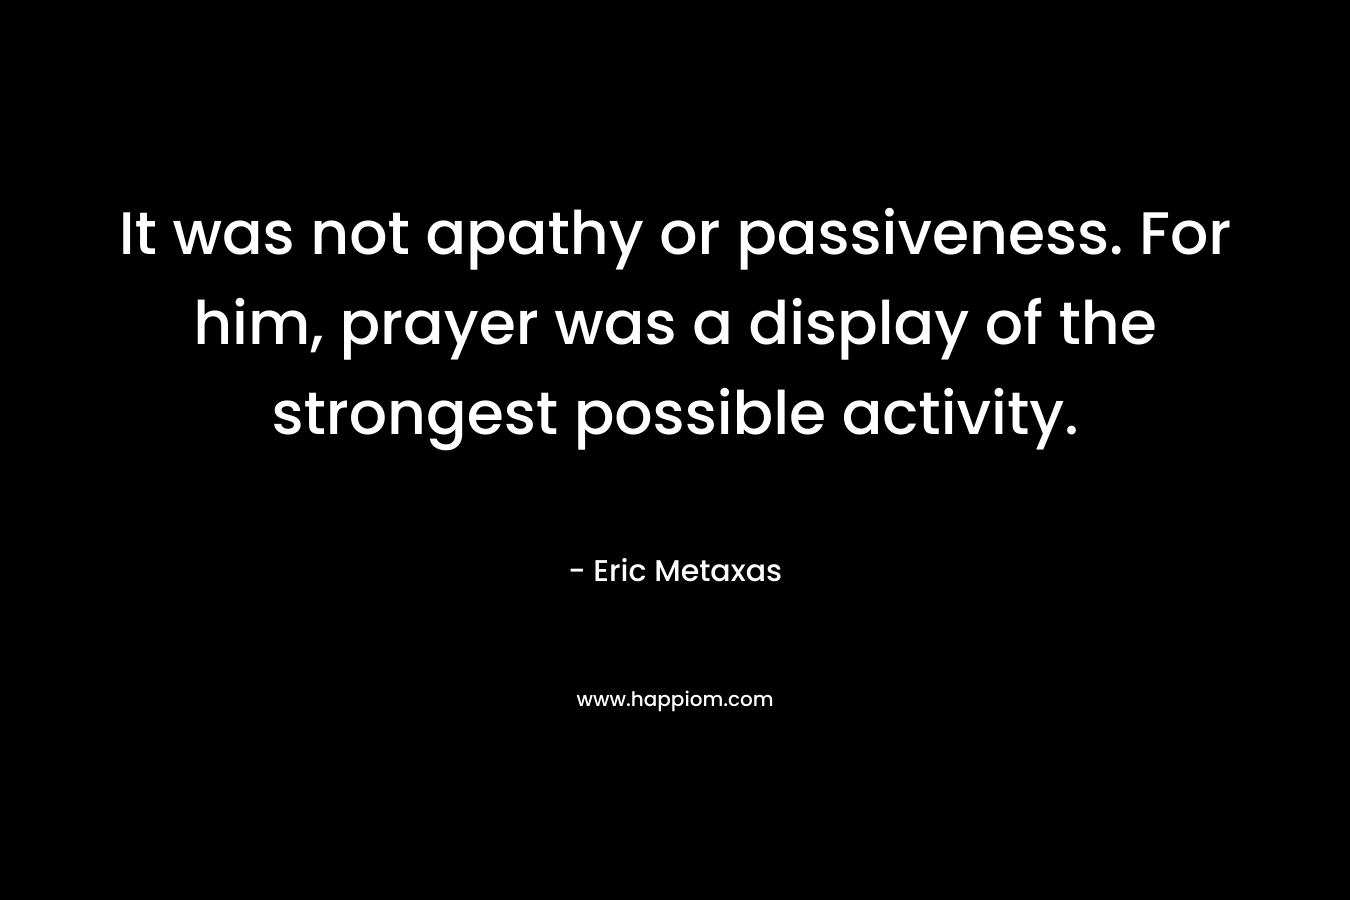 It was not apathy or passiveness. For him, prayer was a display of the strongest possible activity. – Eric Metaxas